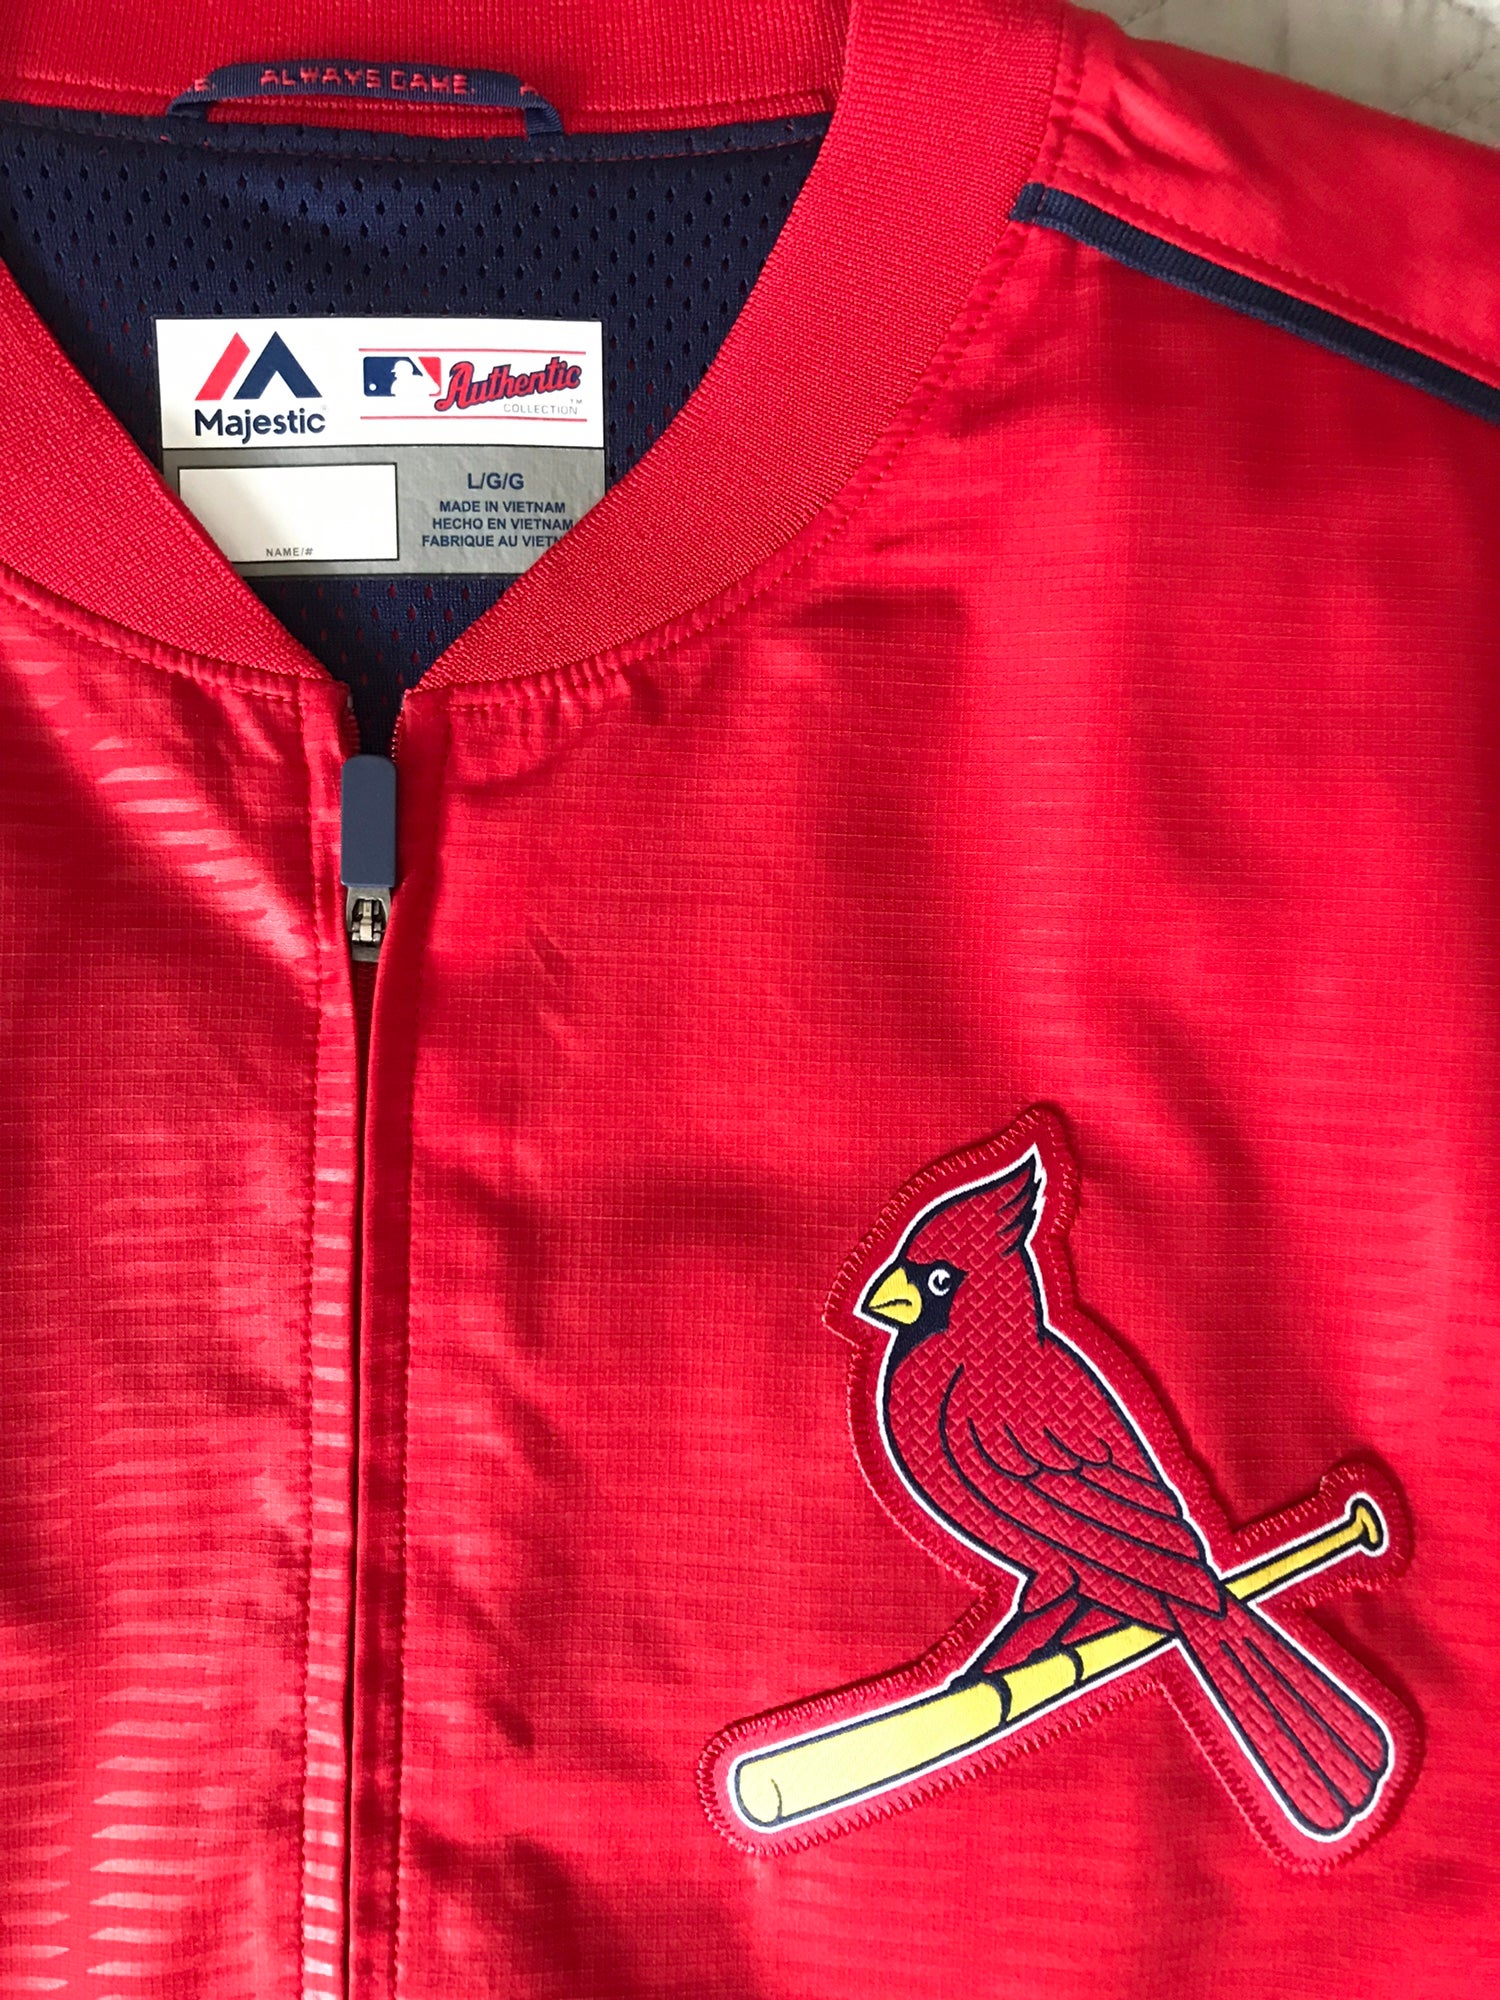 MAJESTIC MLB ST LOUIS CARDINALS ZIP FRONT JACKET Men's Size XL Red And Navy  Blue